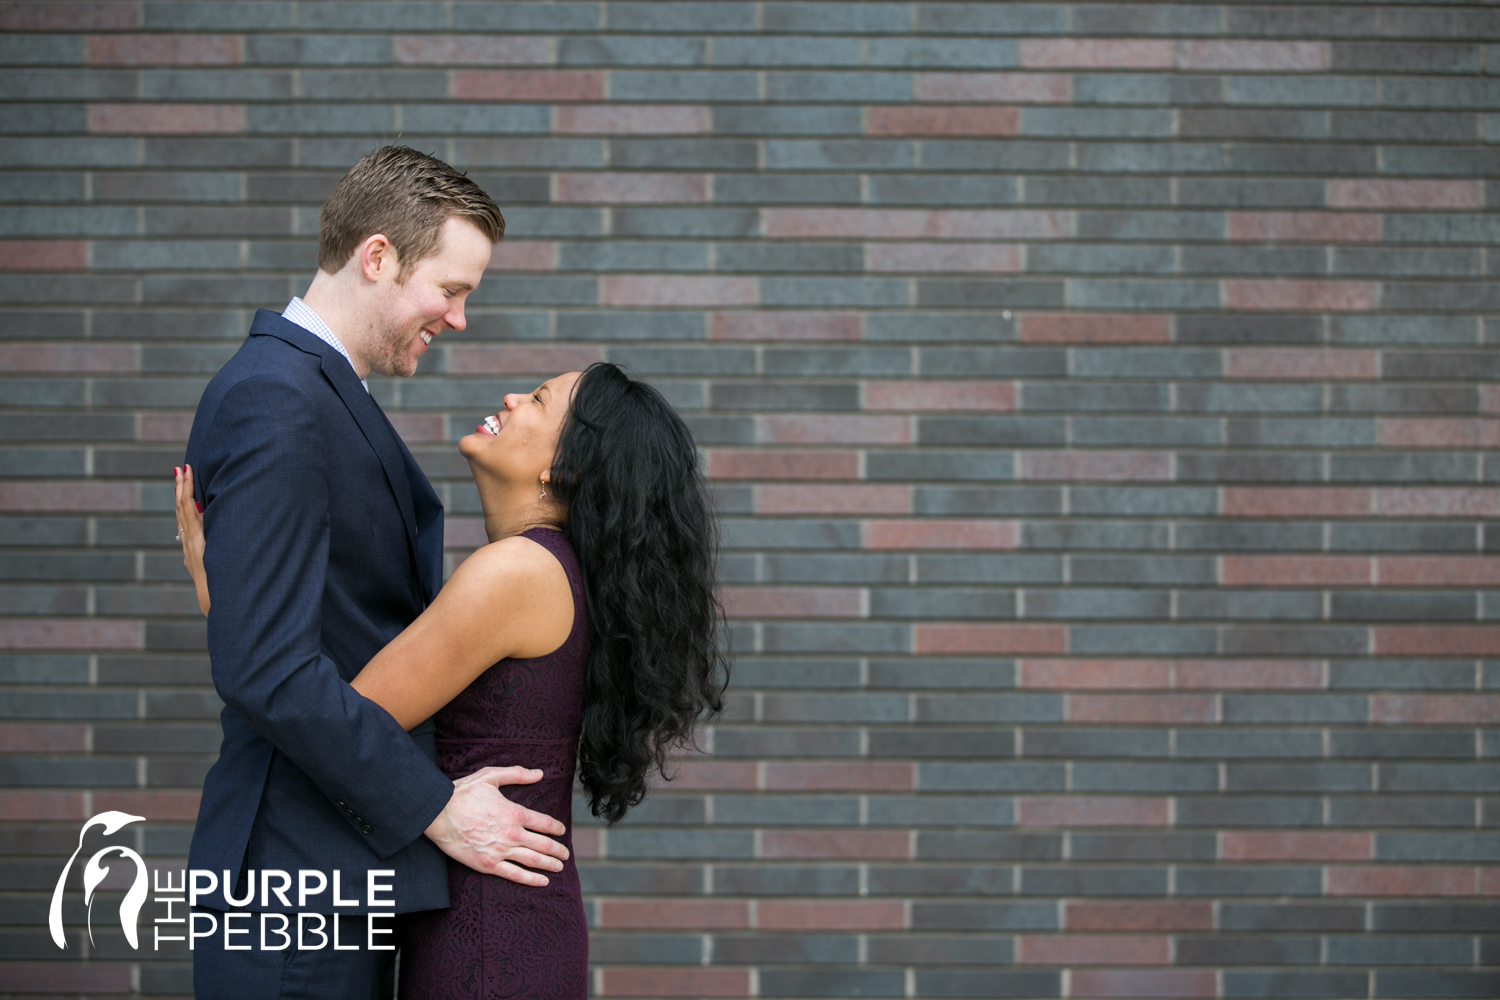 Downtown Dallas Engagement Session